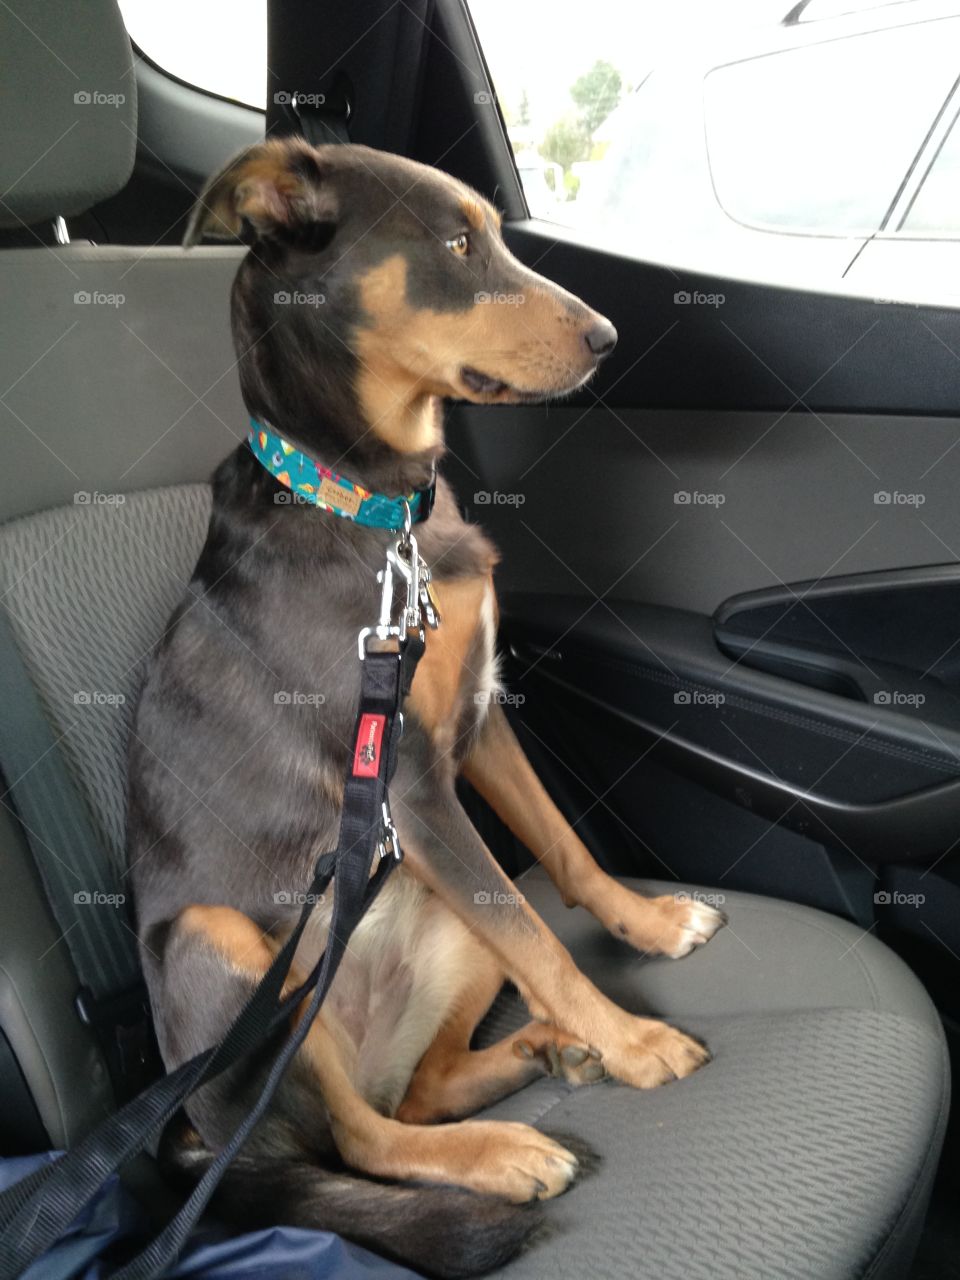 Obedient dog sits calmly in back seat of car for a drive